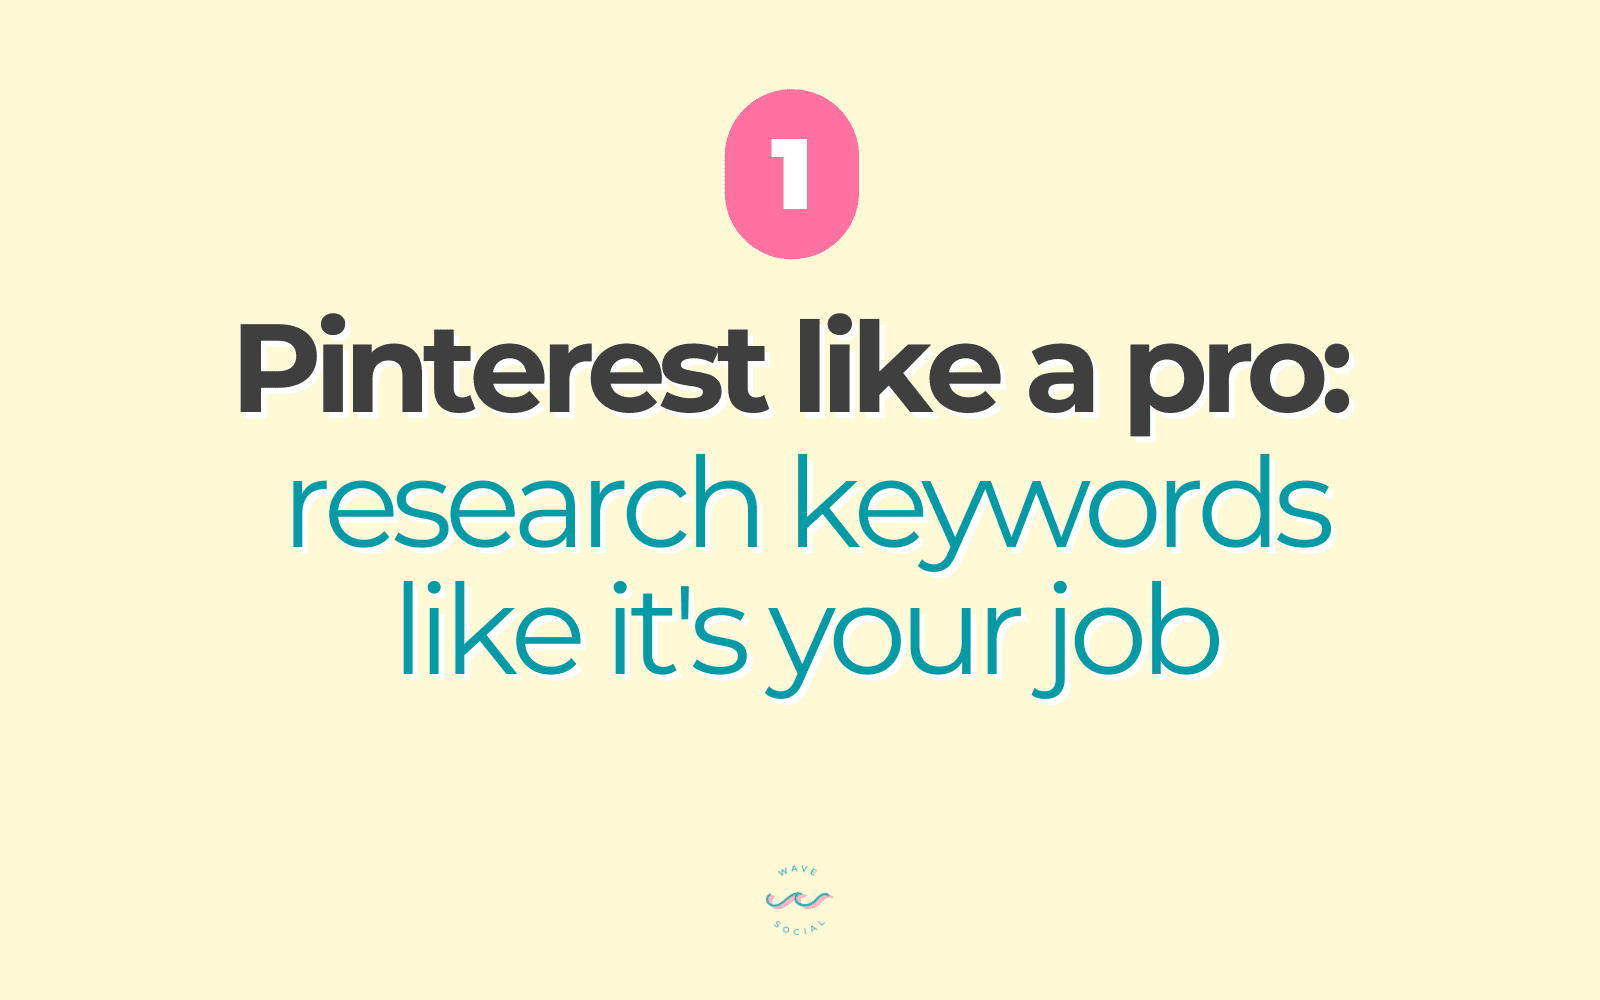 Pinterest like a pro: research keywords like it's your job